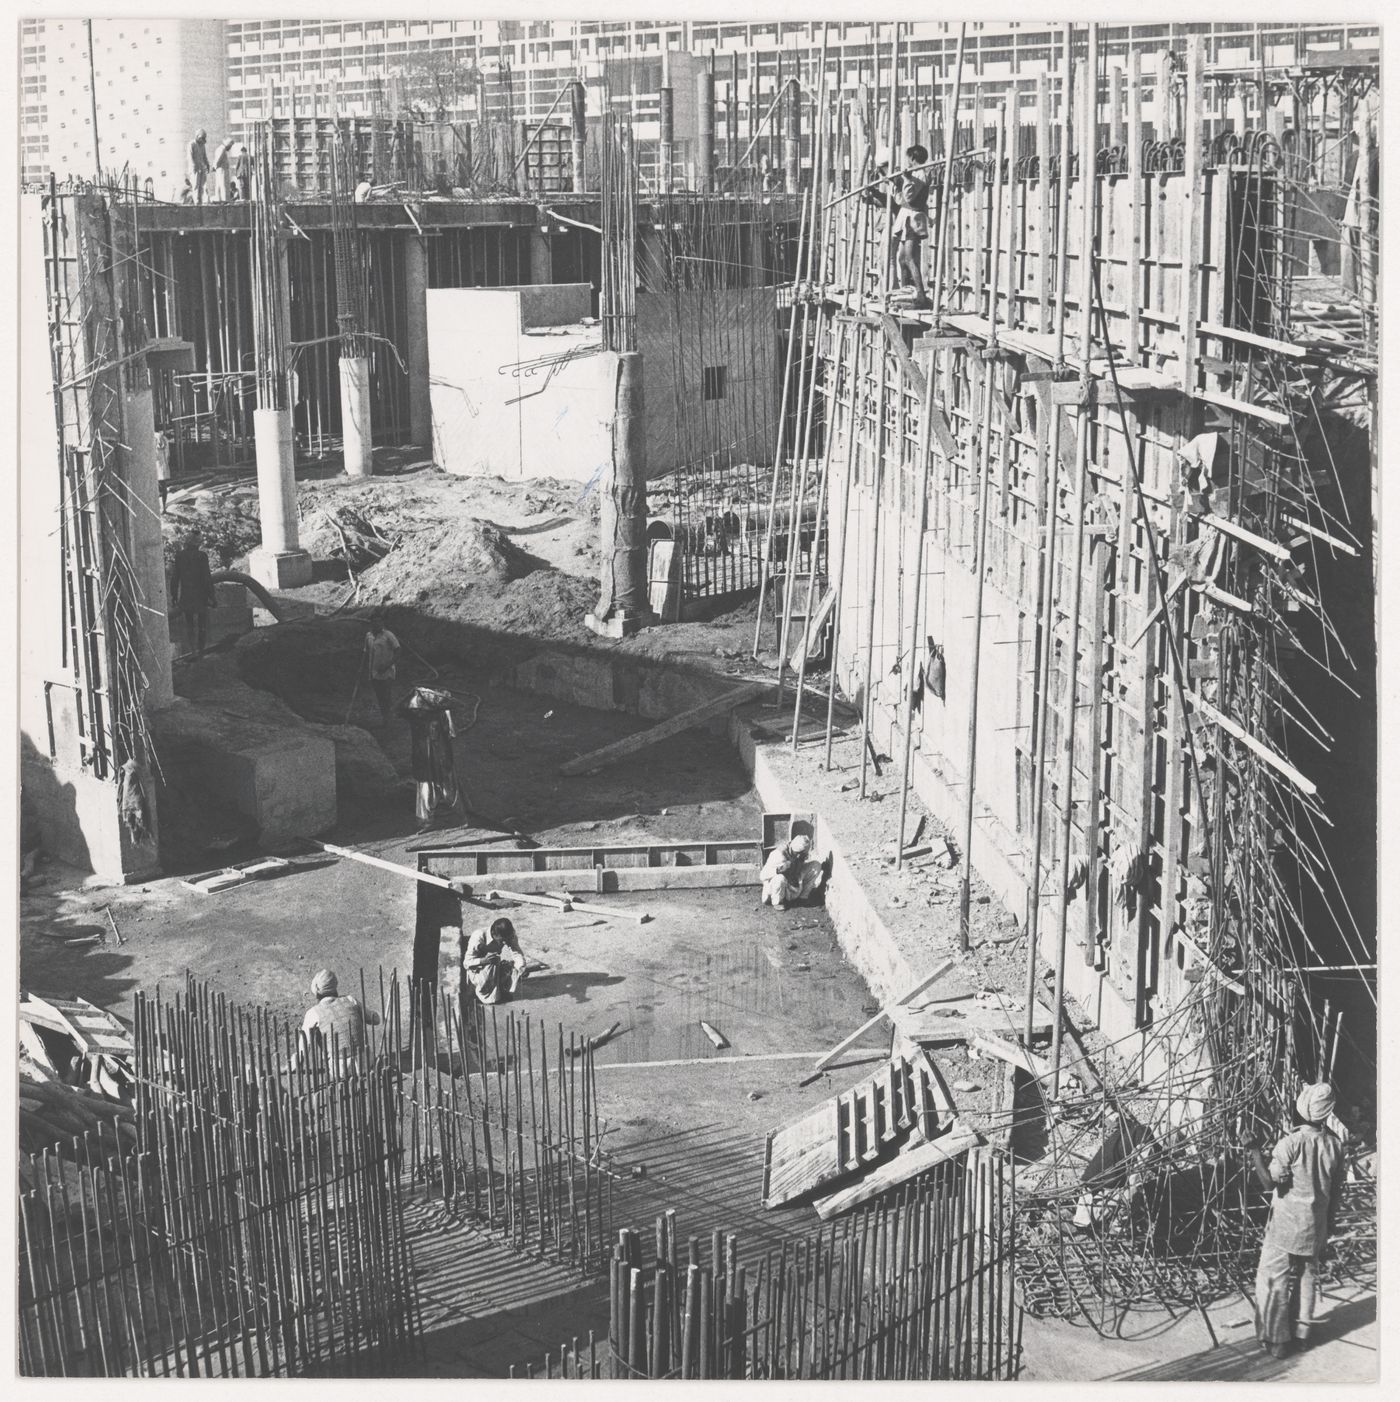 View of the Assembly under construction, Capitol Complex, Sector 1, Chandigarh, India